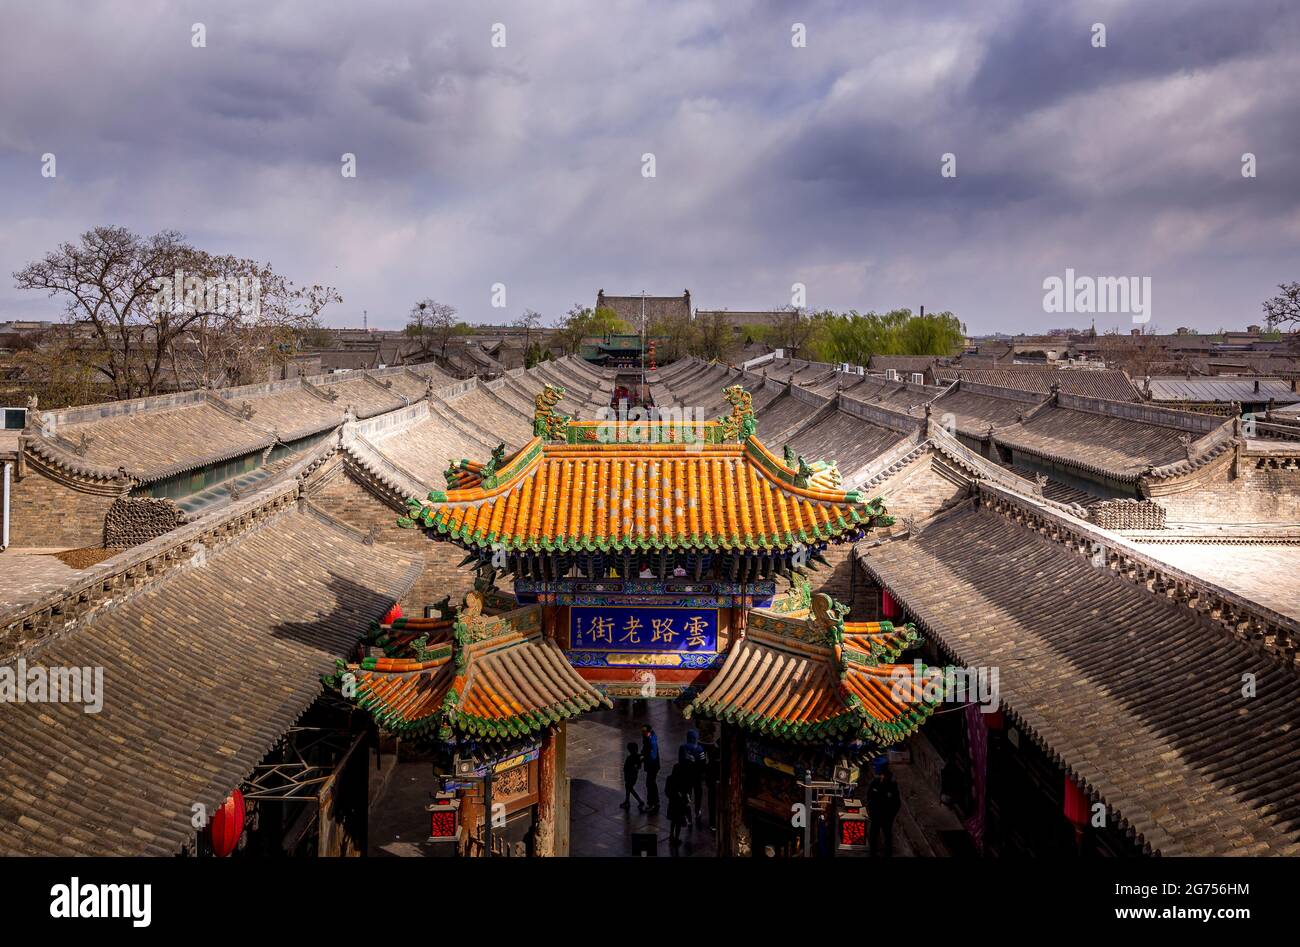 A view of Pingyao City in China Stock Photo